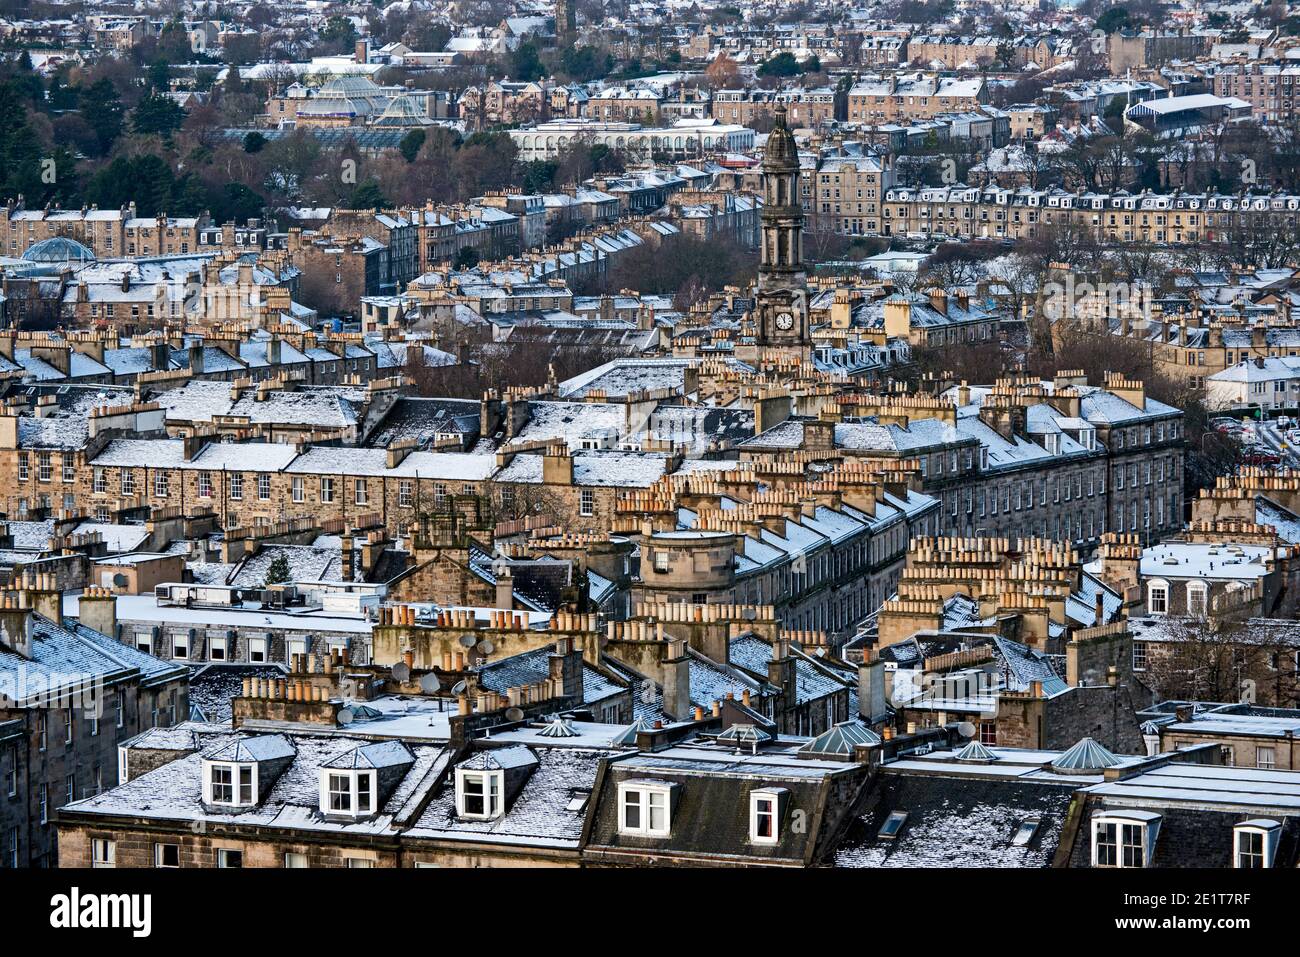 A dusting of snow covers the rooftops to the north in Edinburgh as seen from Calton Hill. Stock Photo